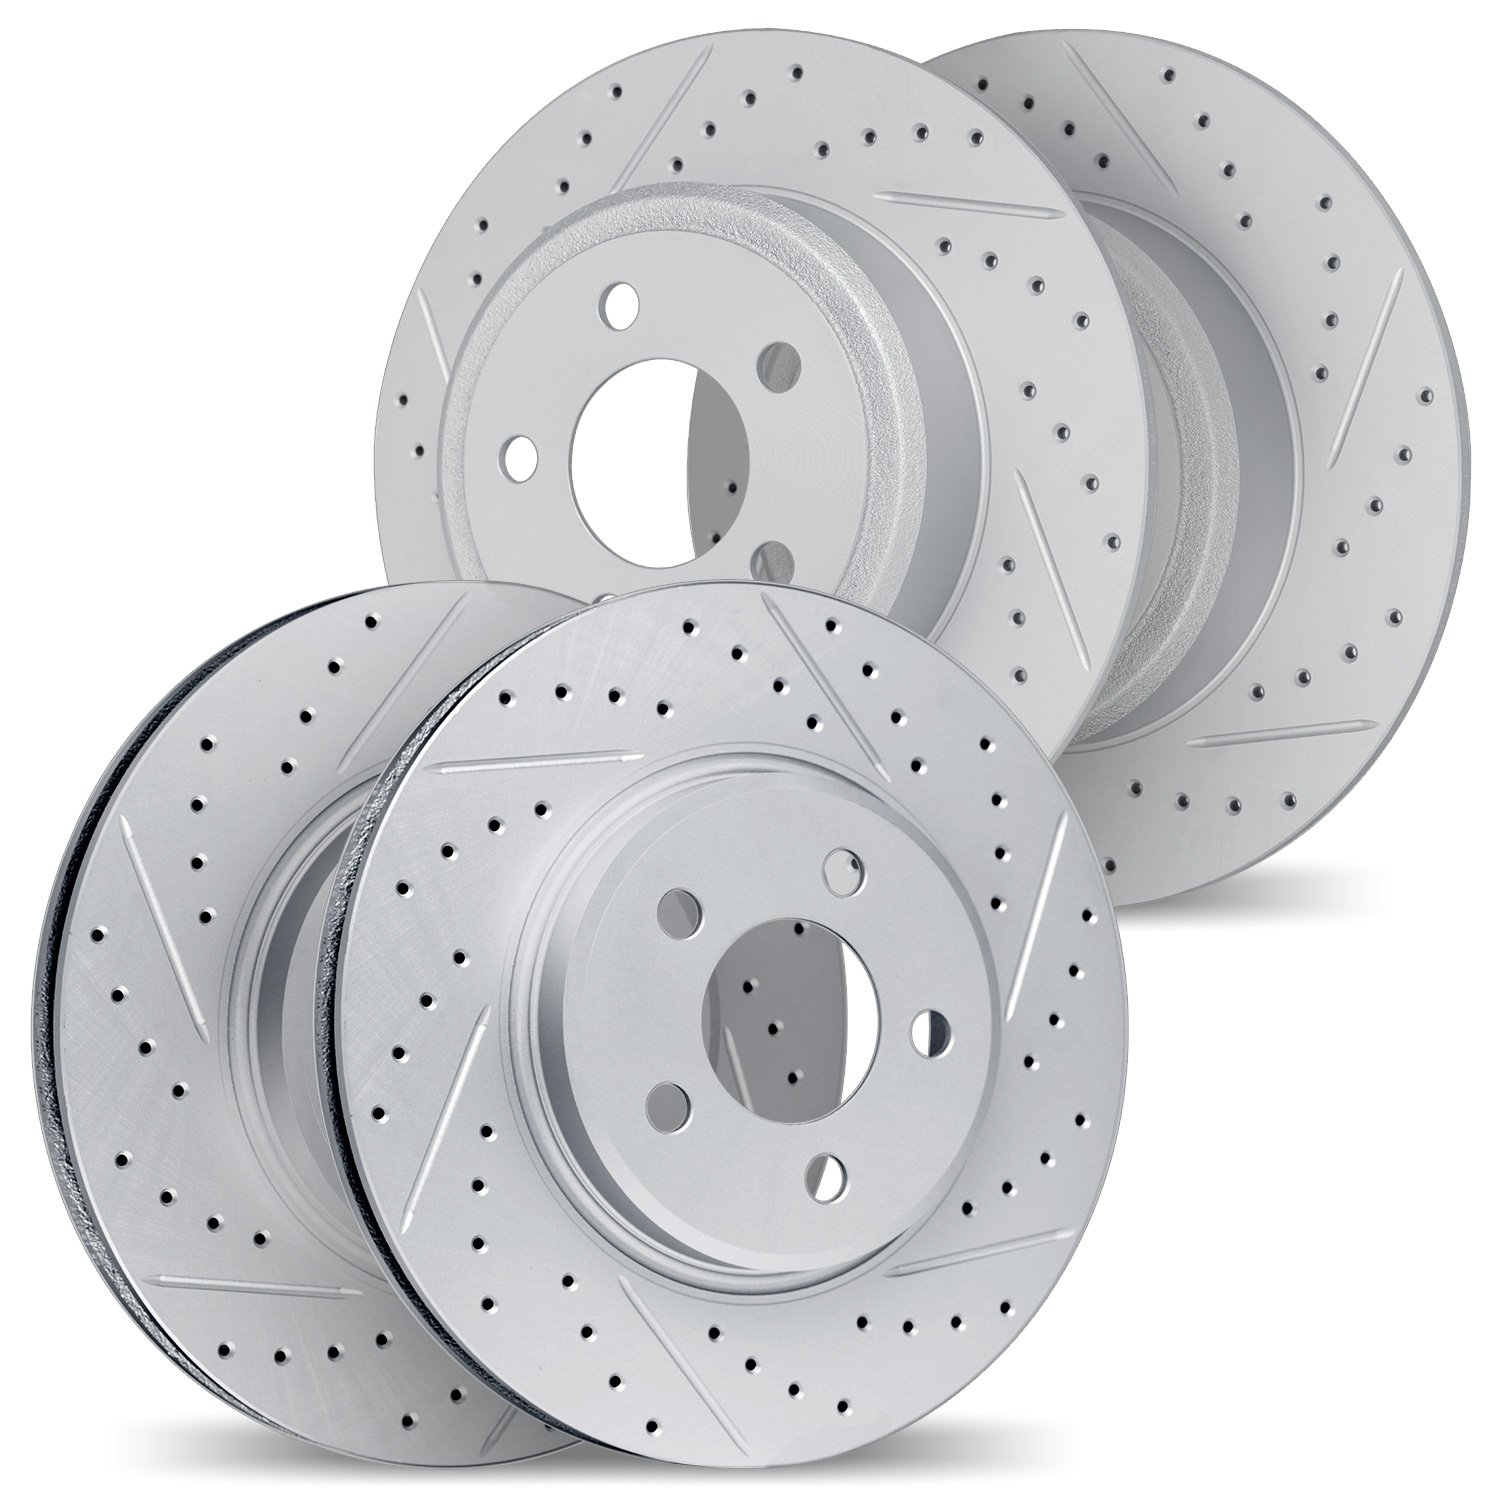 2004-73028 Geoperformance Drilled/Slotted Brake Rotors, 1998-2001 Audi/Volkswagen, Position: Front and Rear